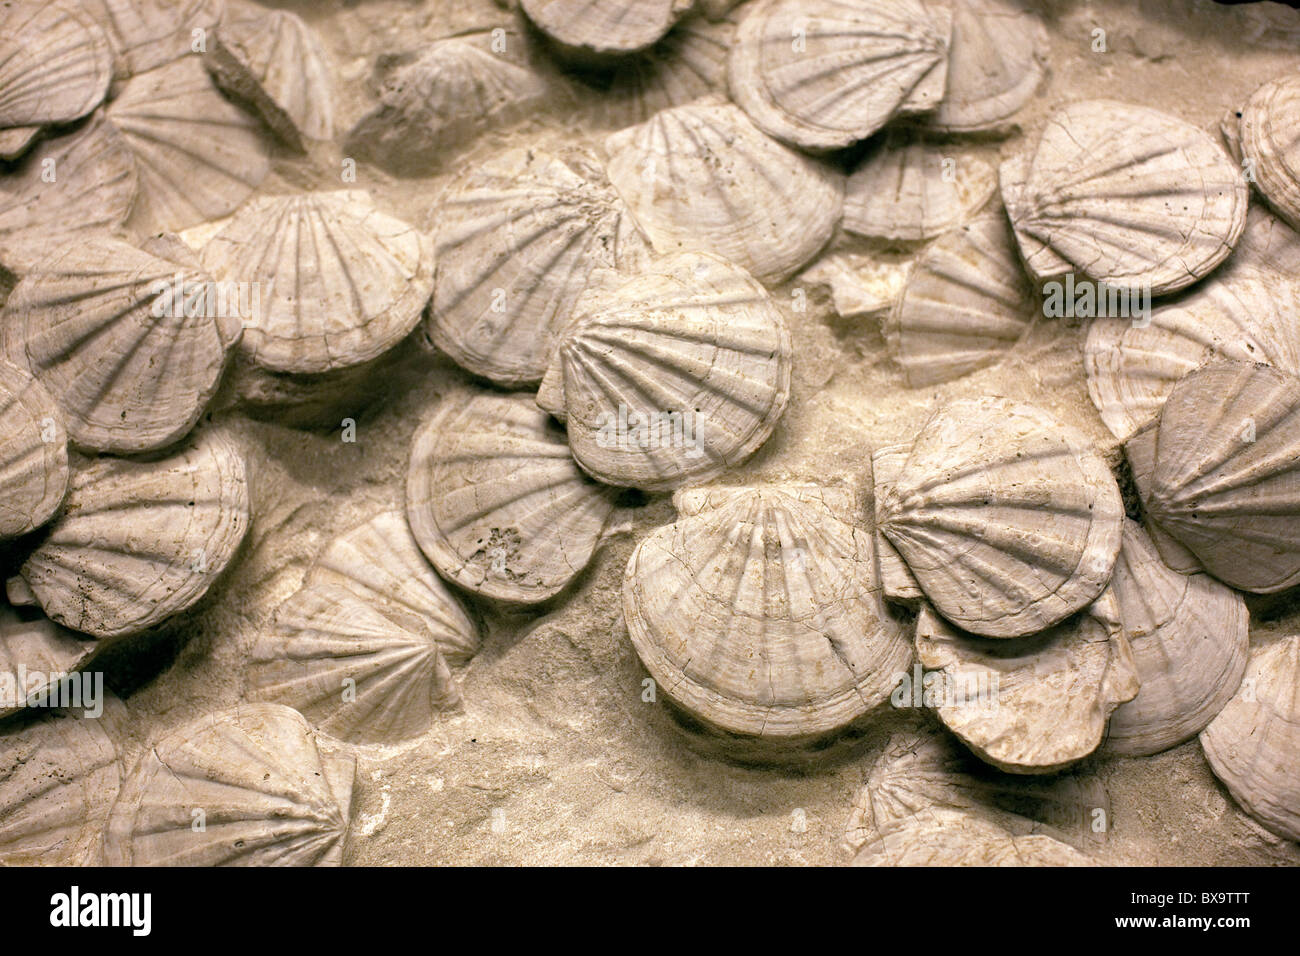 Display of fossilized shells in Royal Festival Hall, London provided by Shell oil company Stock Photo